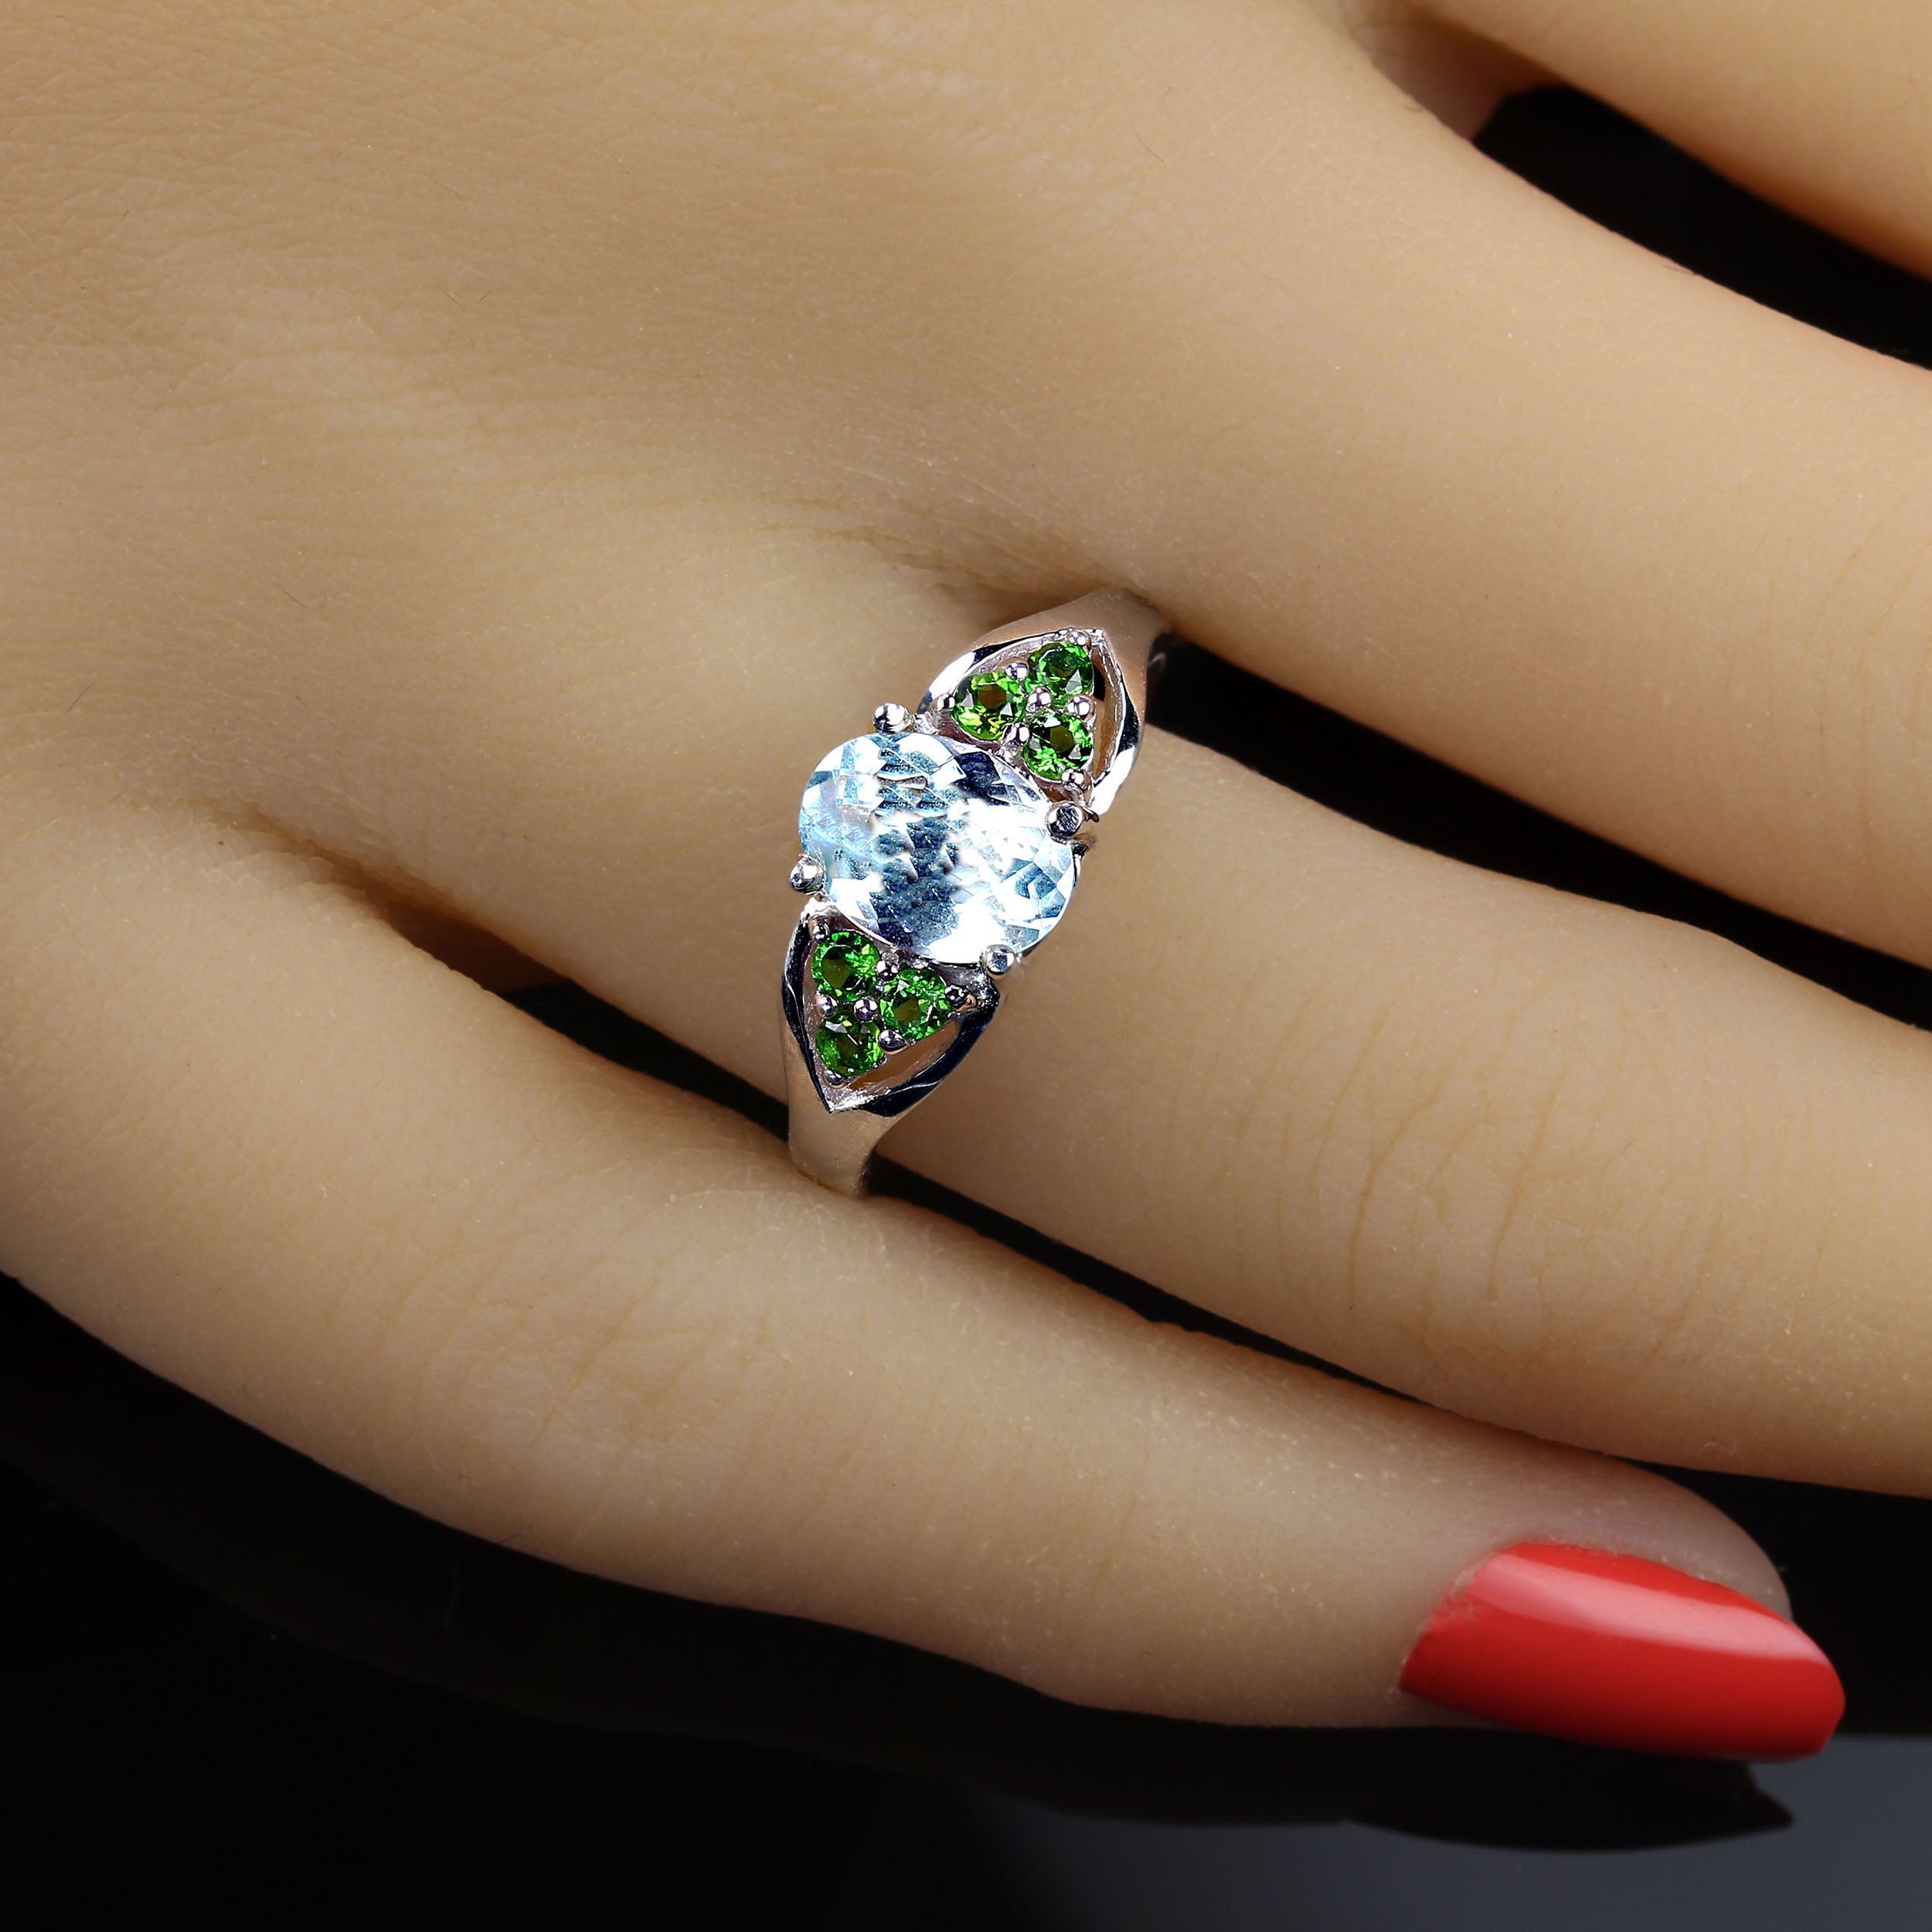  AJD Sparkling Aquamarine w Chrome Diopside in Silver Ring March Birthstone For Sale